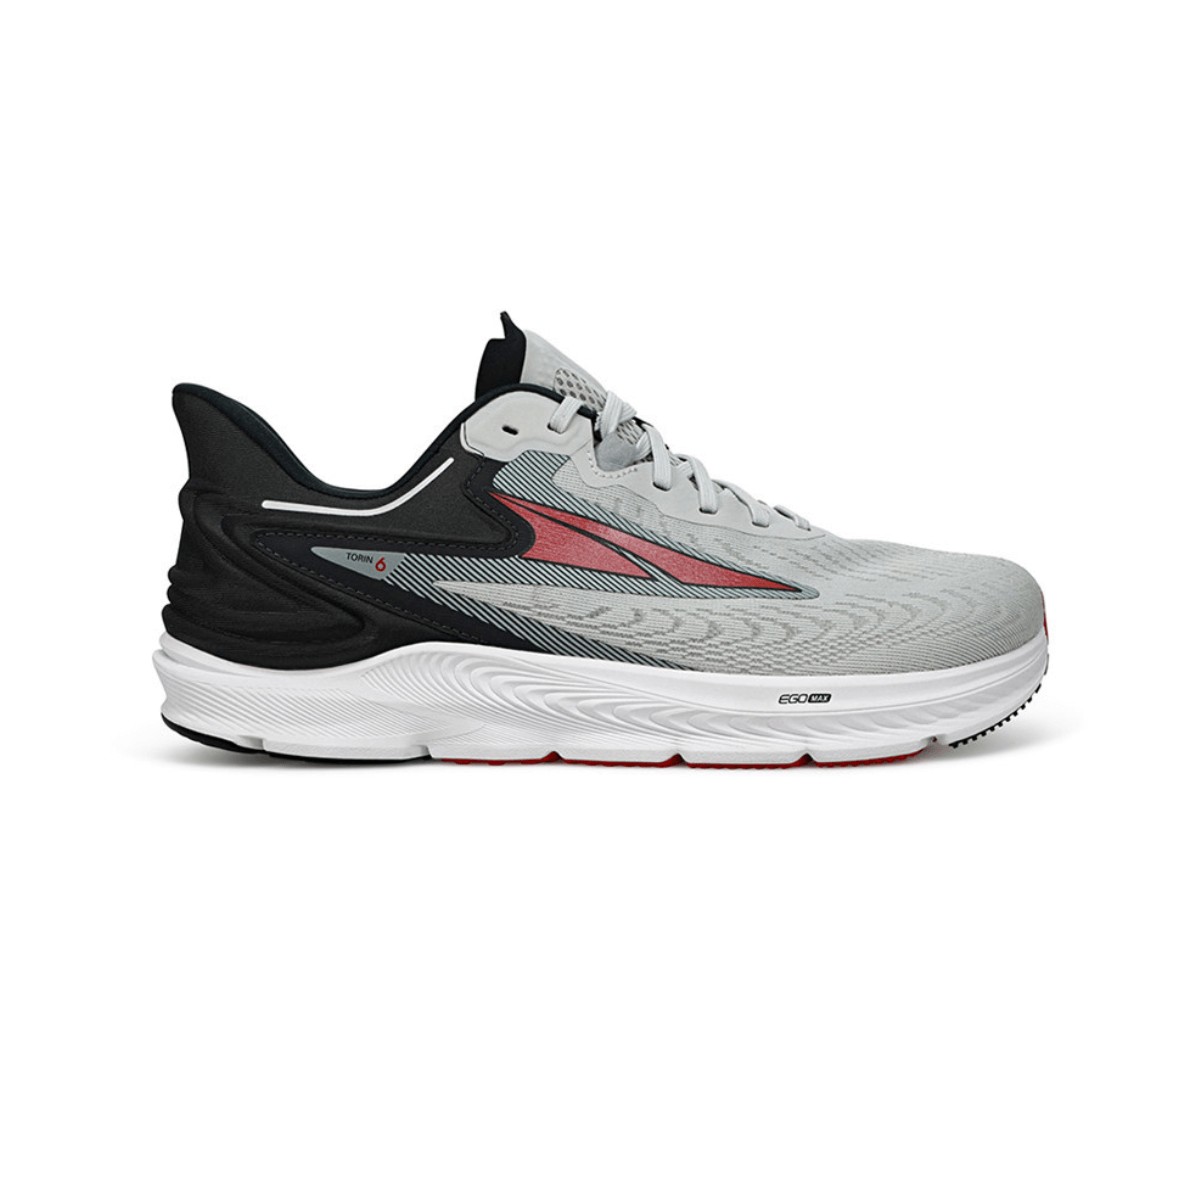 Chaussures Altra Torin 6 Gris Rouge AW22, Taille 41 - EUR